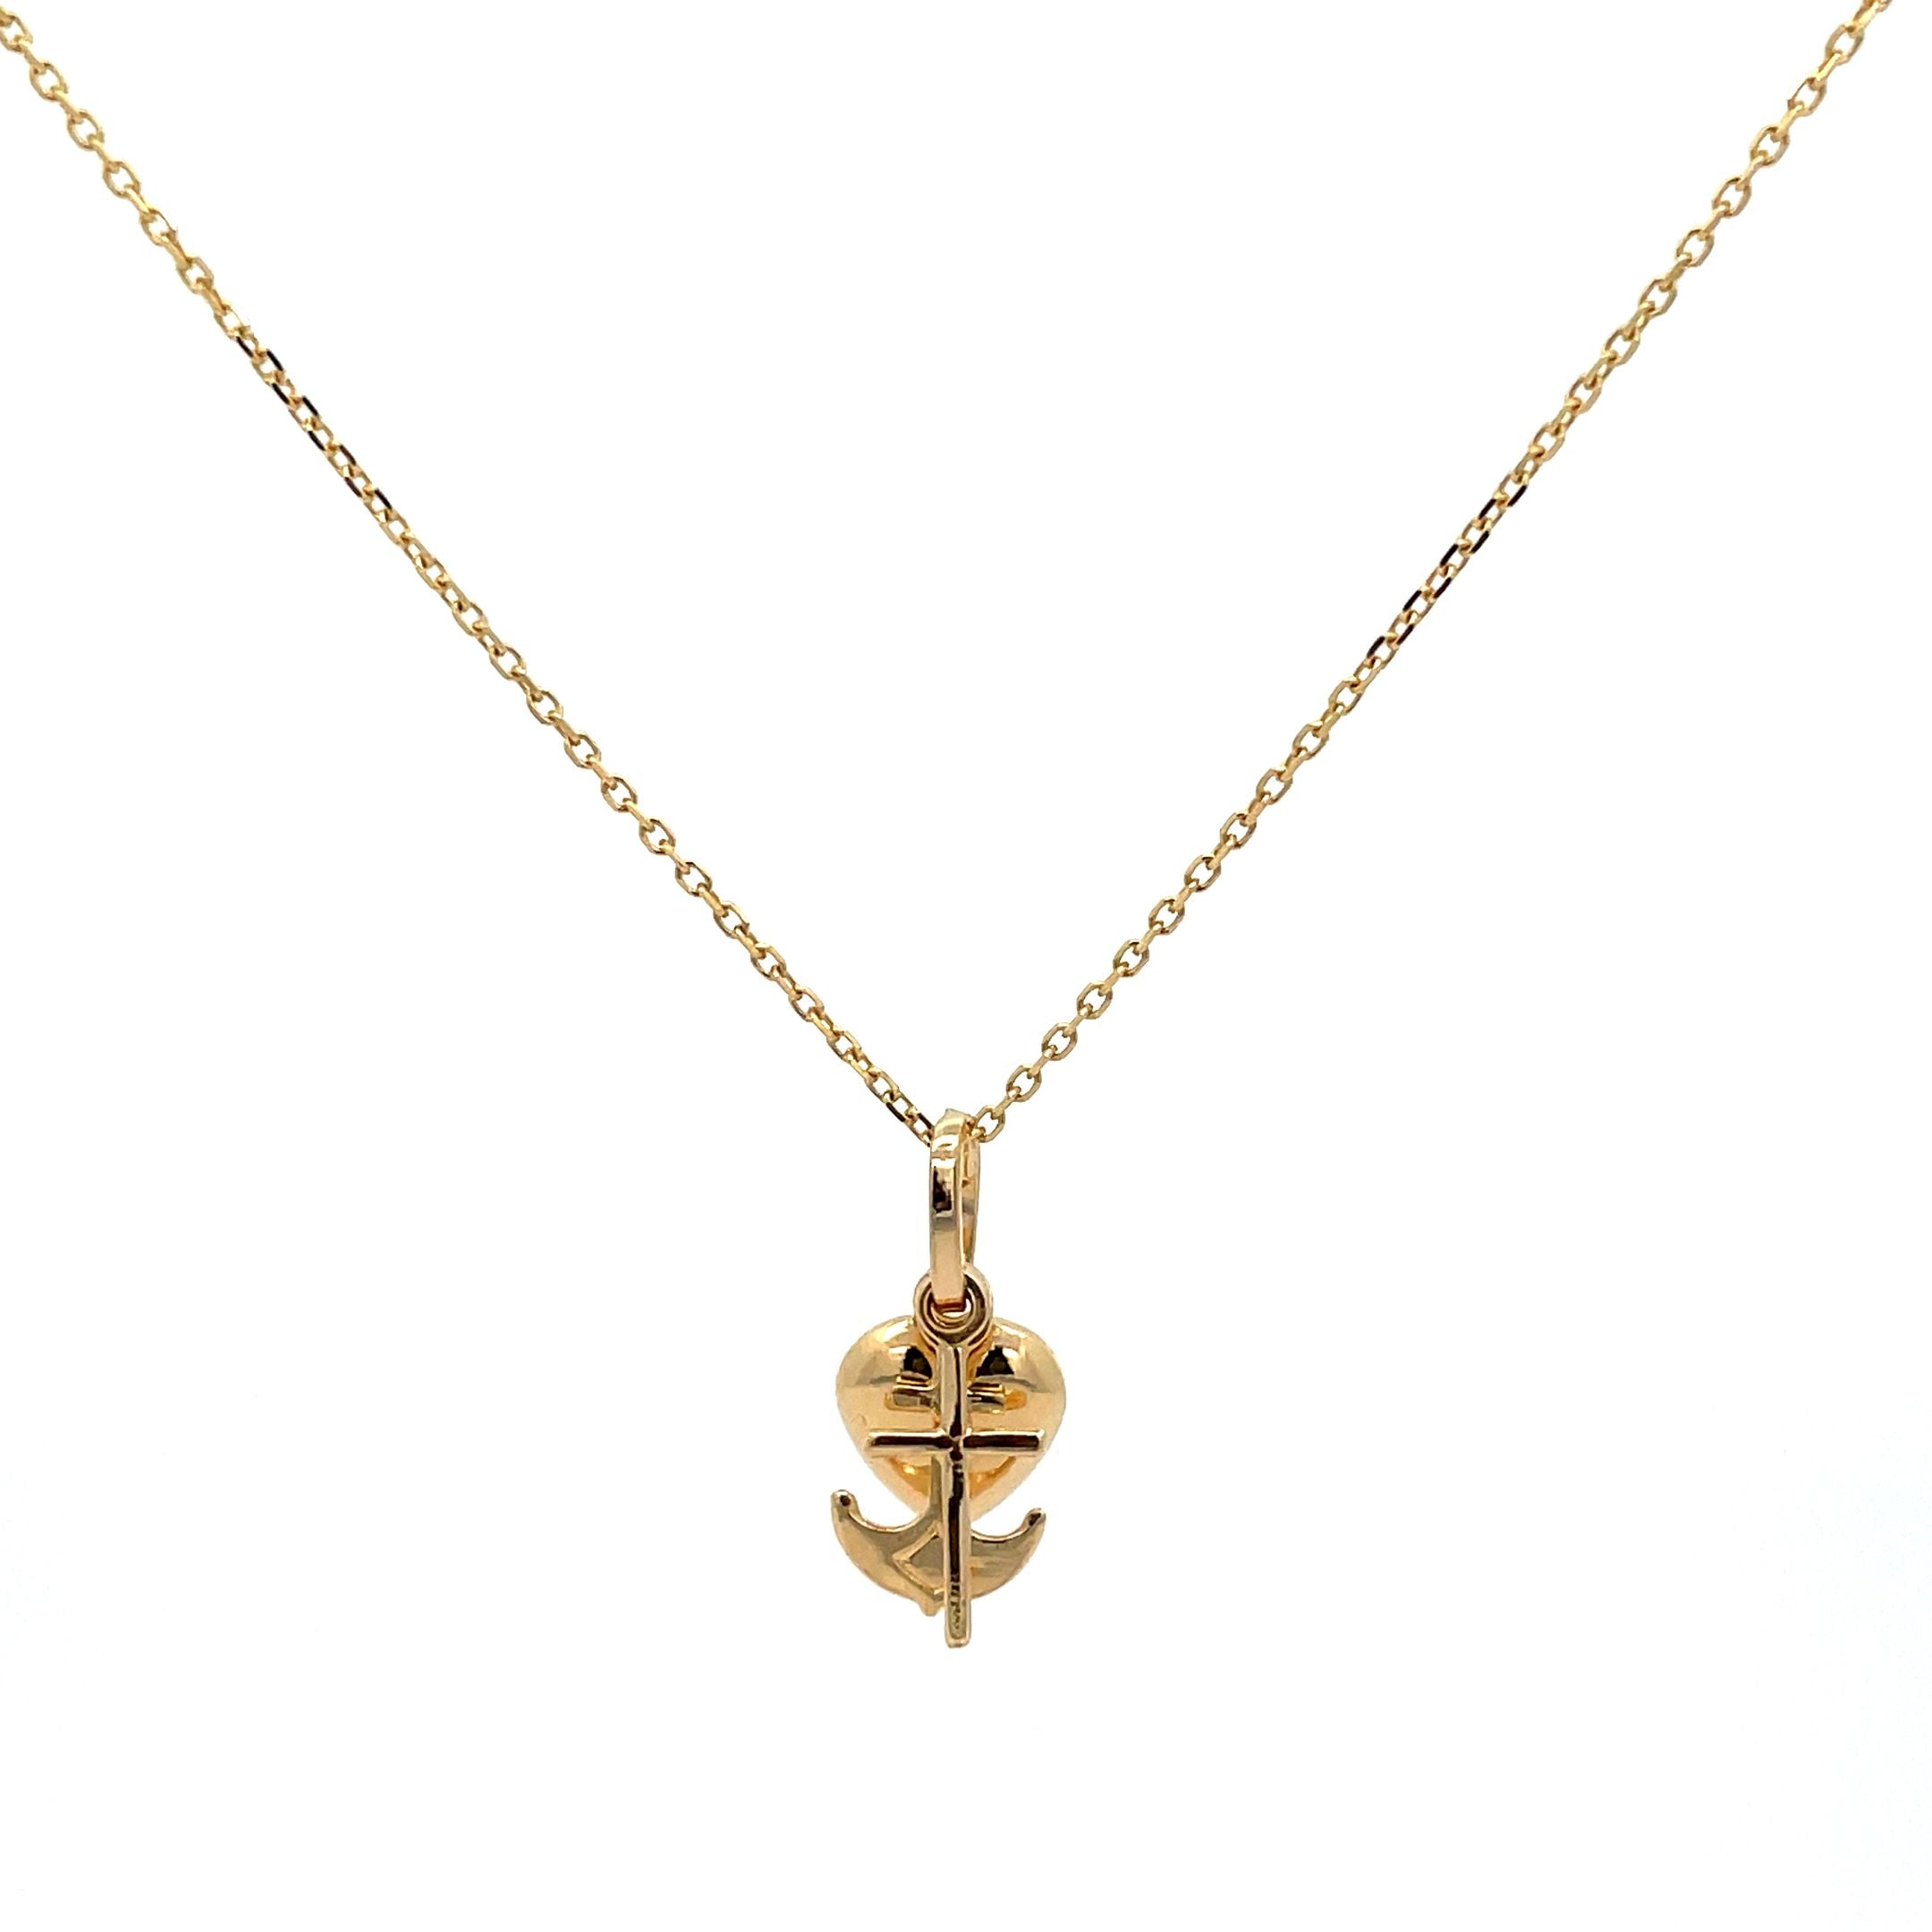 Be inspired with this exquisite 14k Italian Yellow Gold Faith, Hope & Love Pendant Necklace. The intricate design demonstrates a beautiful craftsmanship, while the inspirational message ignites passion in its wearer. Ideal for any special occasion, this stunning piece is a lasting reminder of positivity and joy.  Chain is optional $299, 18" long